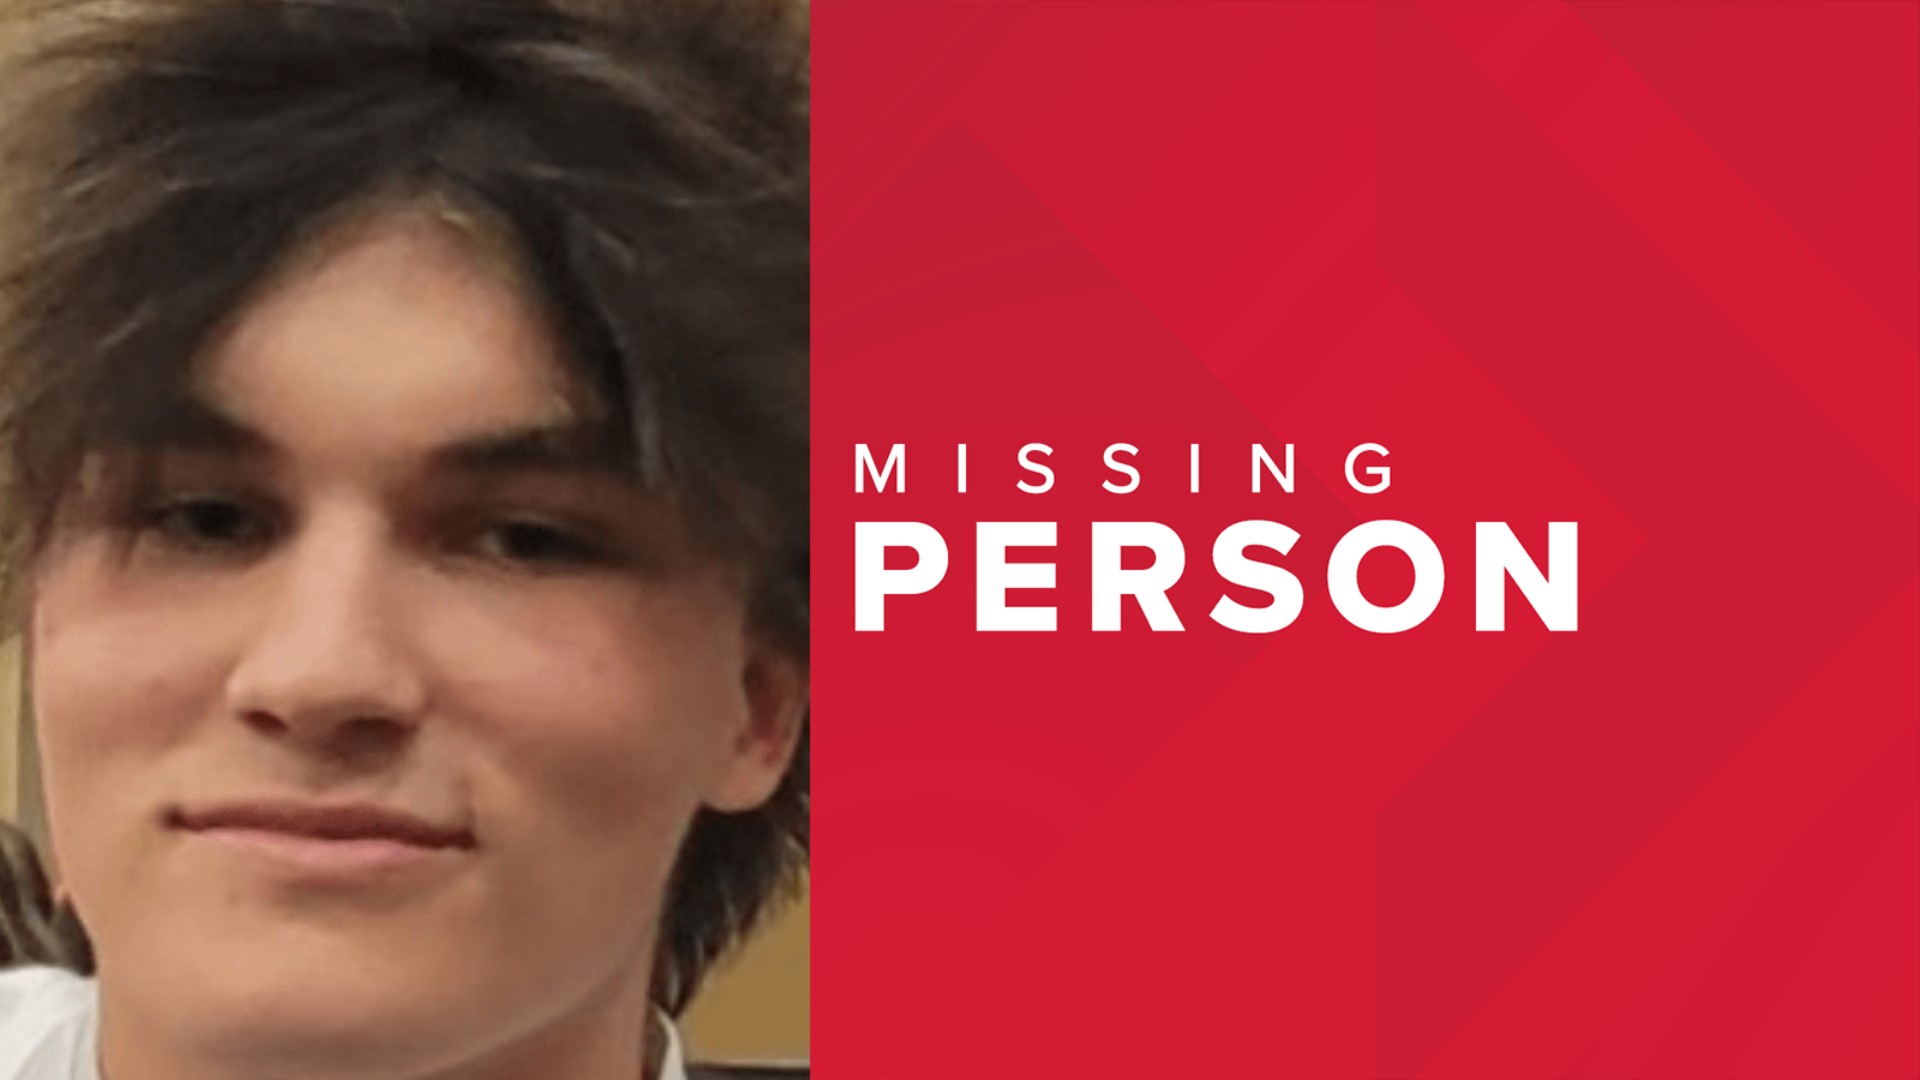 Norfolk police are asking for help finding Owen Ayer, 18, who was last seen Tuesday at 10:45 a.m. in the 2200th block of Colonial Avenue.